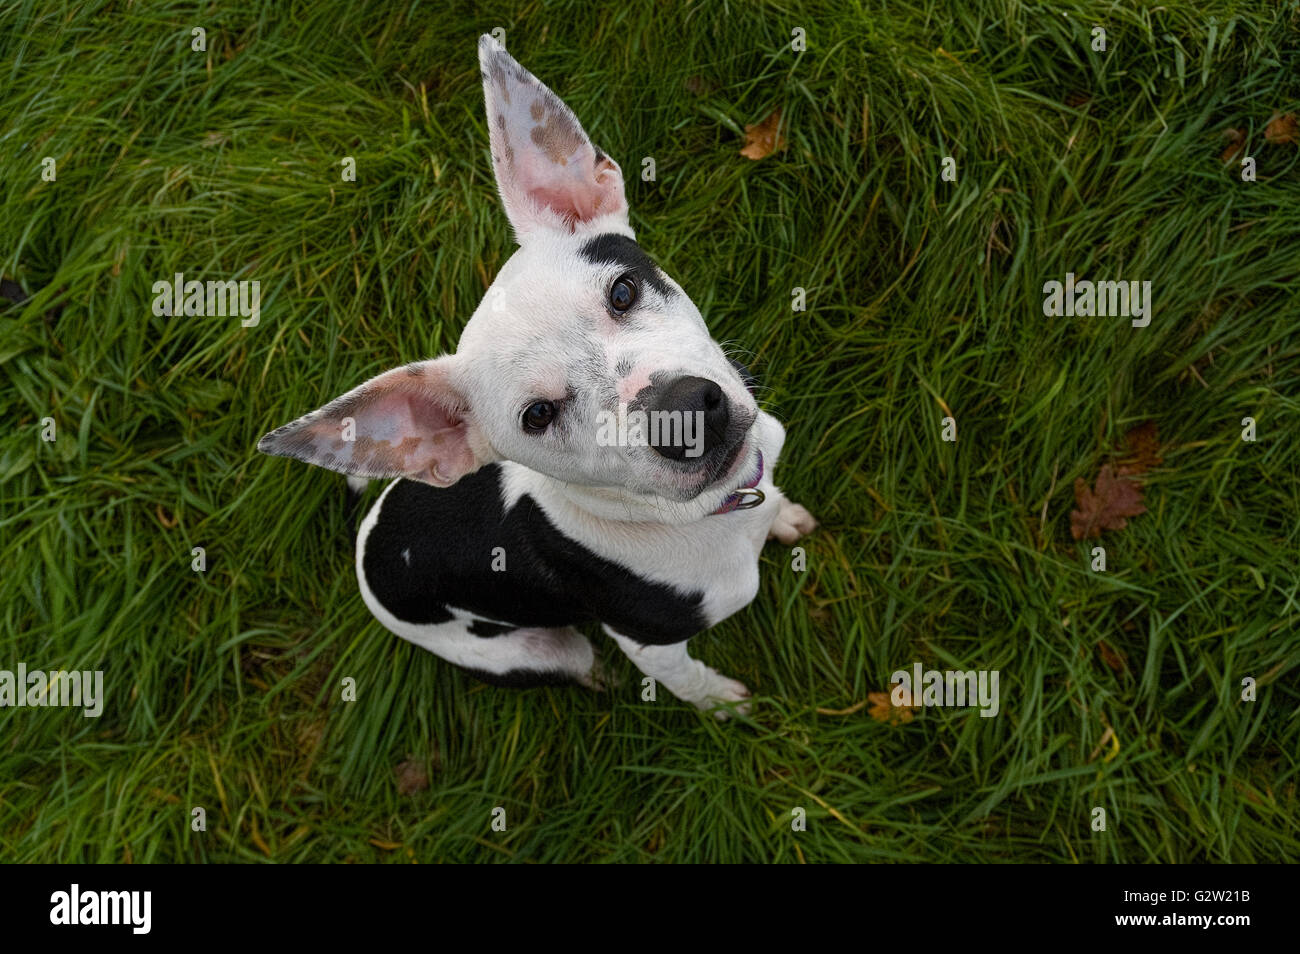 Mixed breed dog with large pointed ears and black and white markings looking up directly at the camera Stock Photo